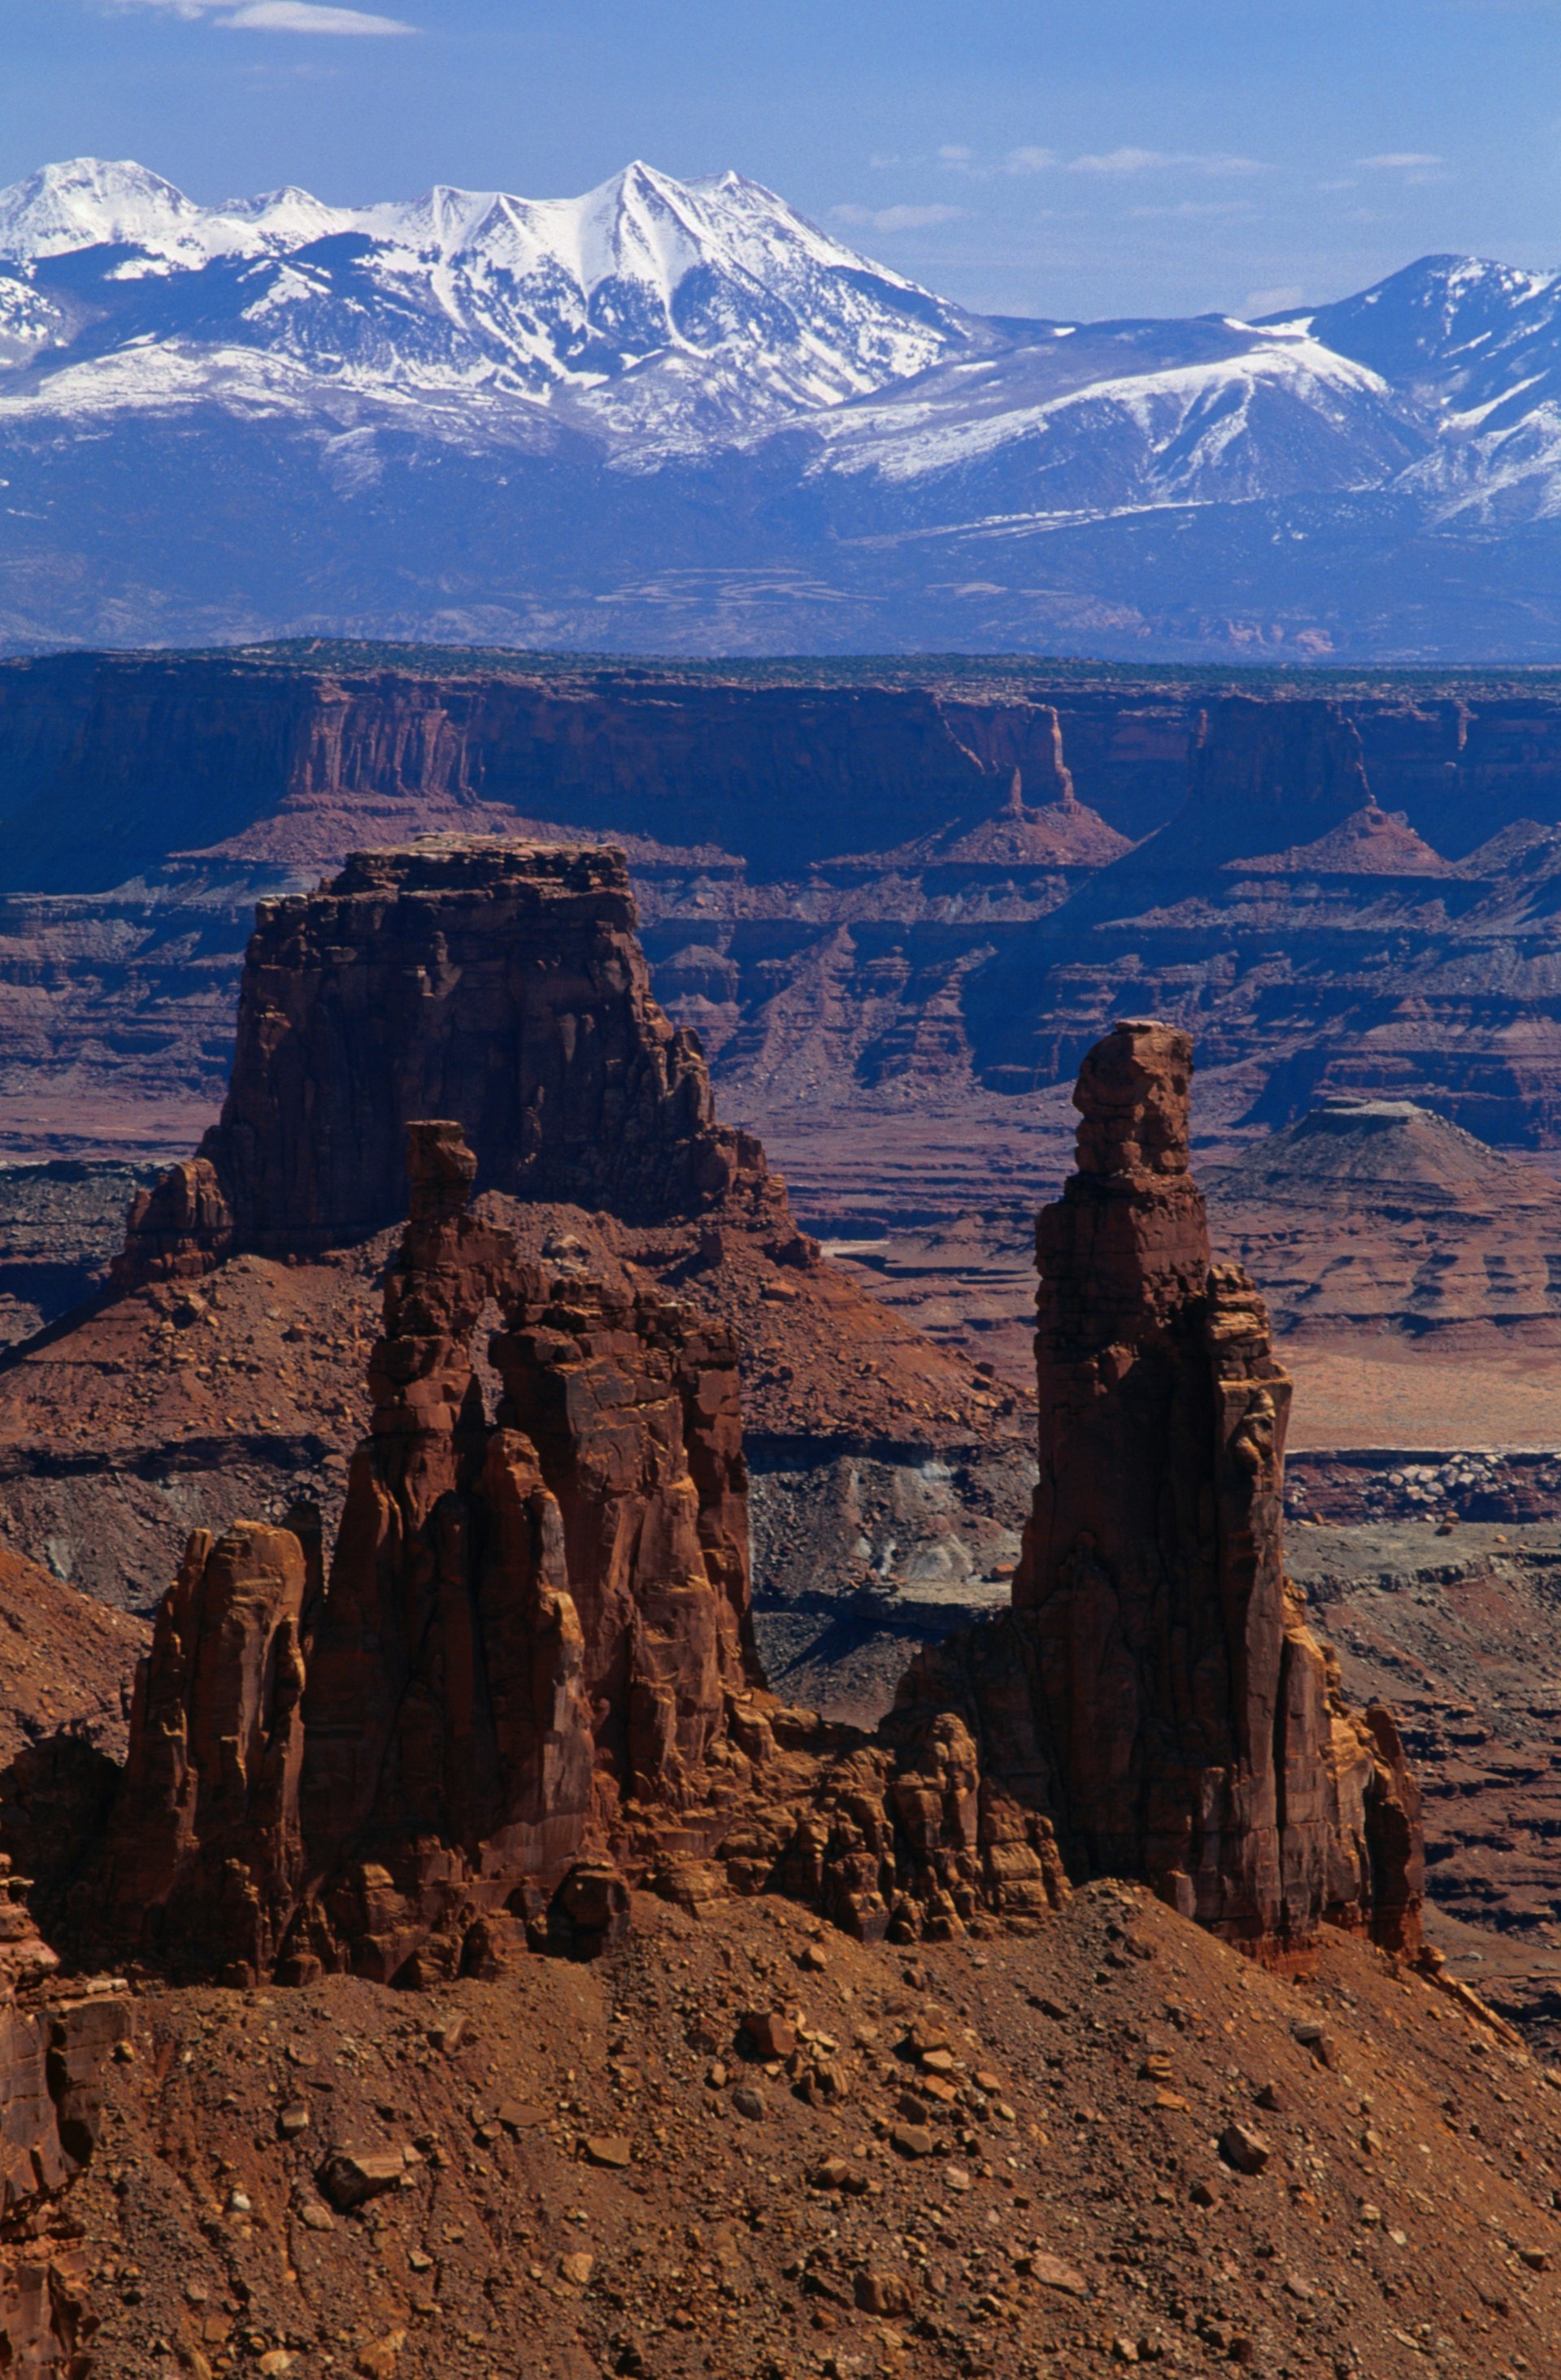 Islands in the Sky and the amazing Washerwoman Arch in Canyonlands National Park. Much of the landscape in this part of country was formed by the natural flow of the Colorado River.